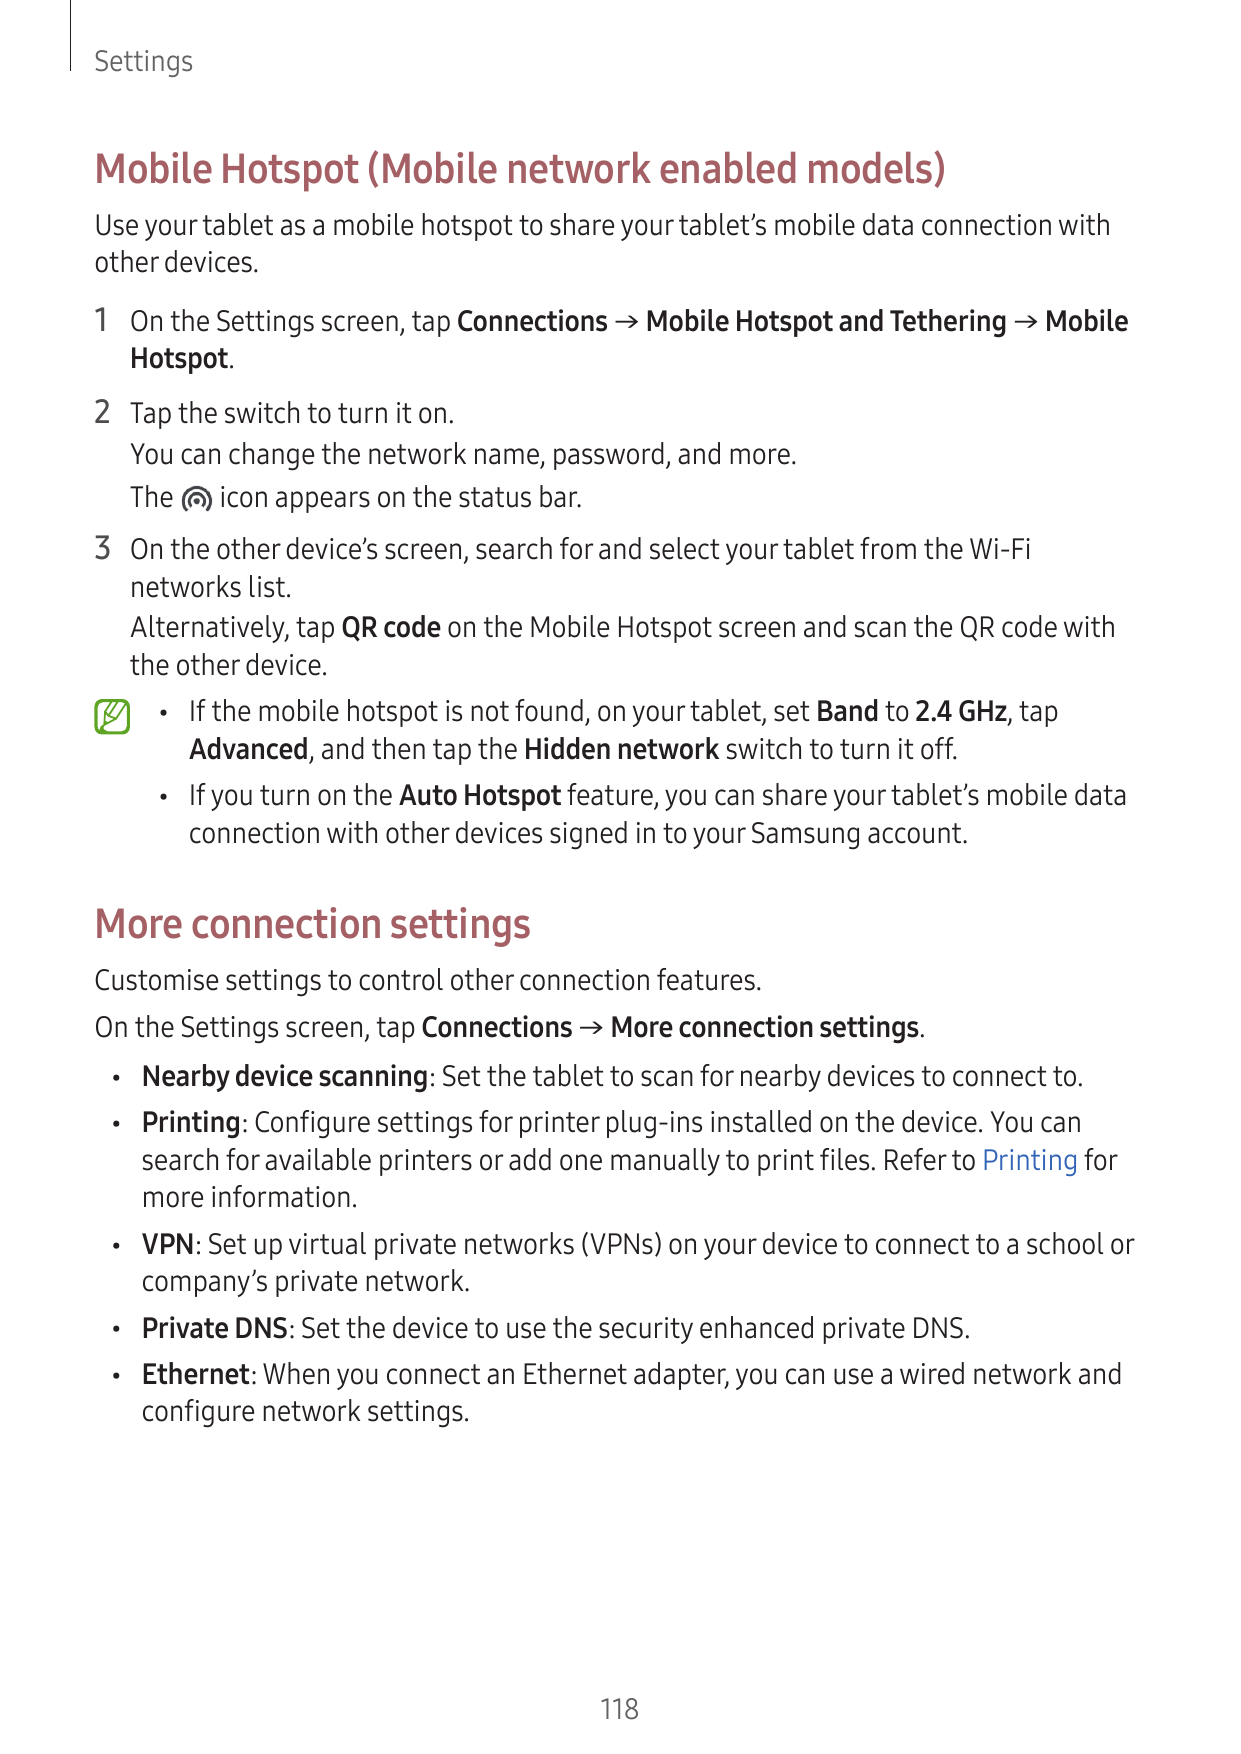 SettingsMobile Hotspot (Mobile network enabled models)Use your tablet as a mobile hotspot to share your tablet’s mobile data con